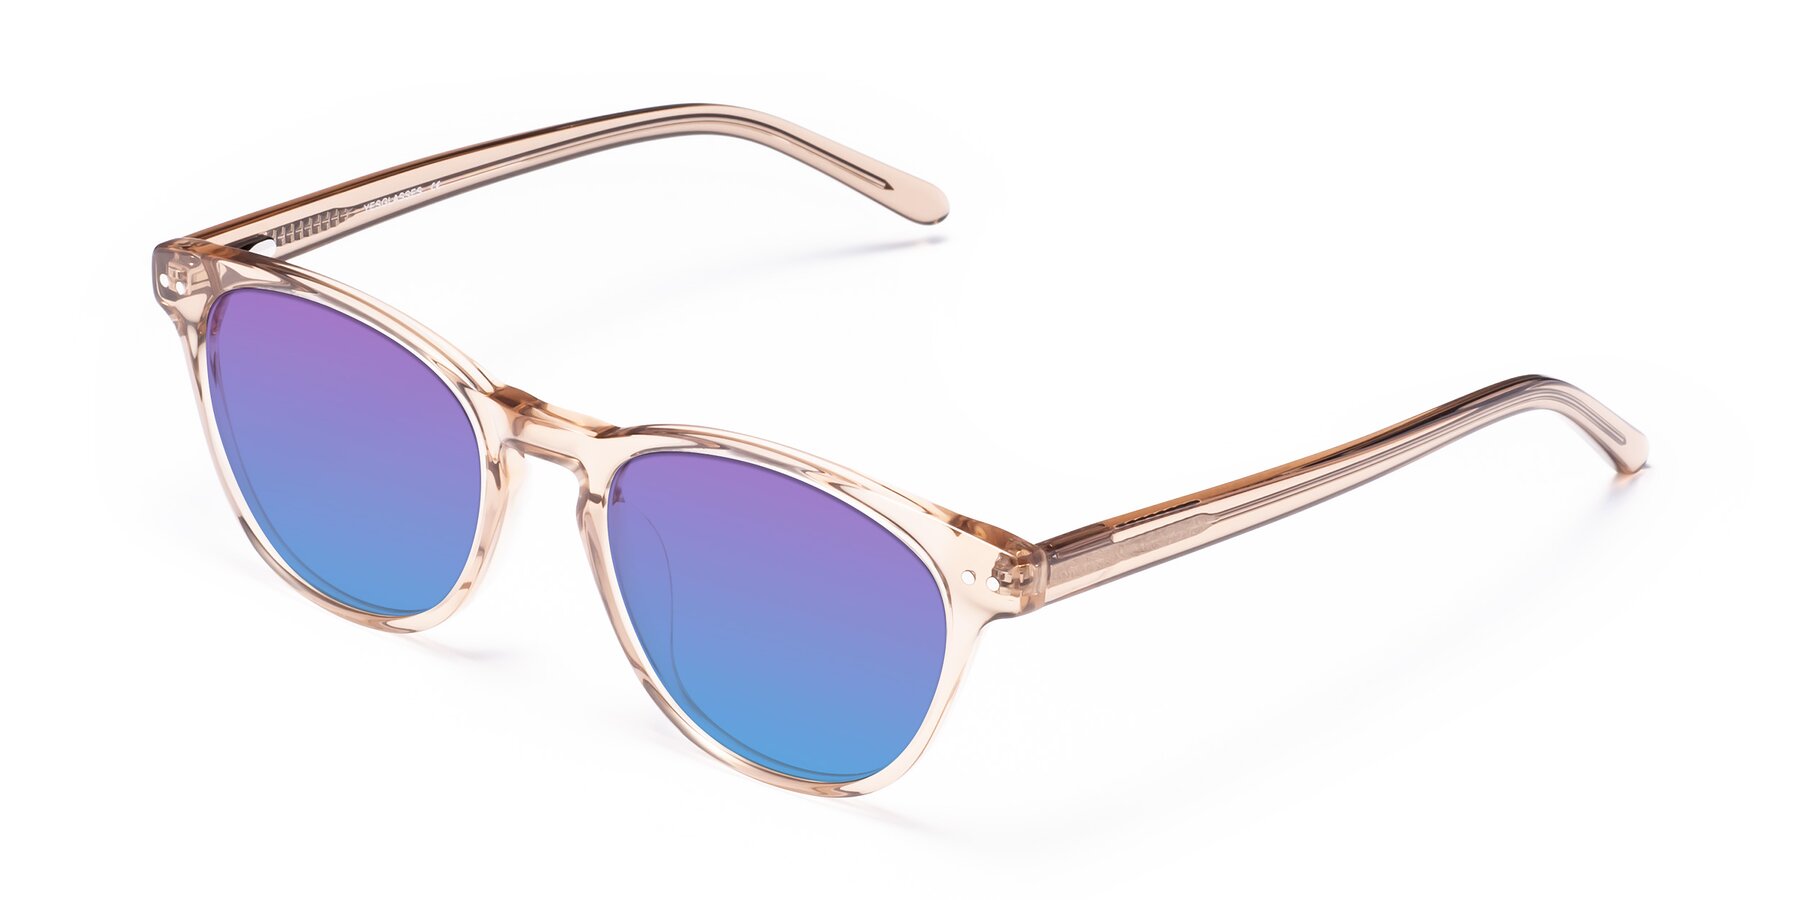 Angle of Blaze in light Brown with Purple / Blue Gradient Lenses